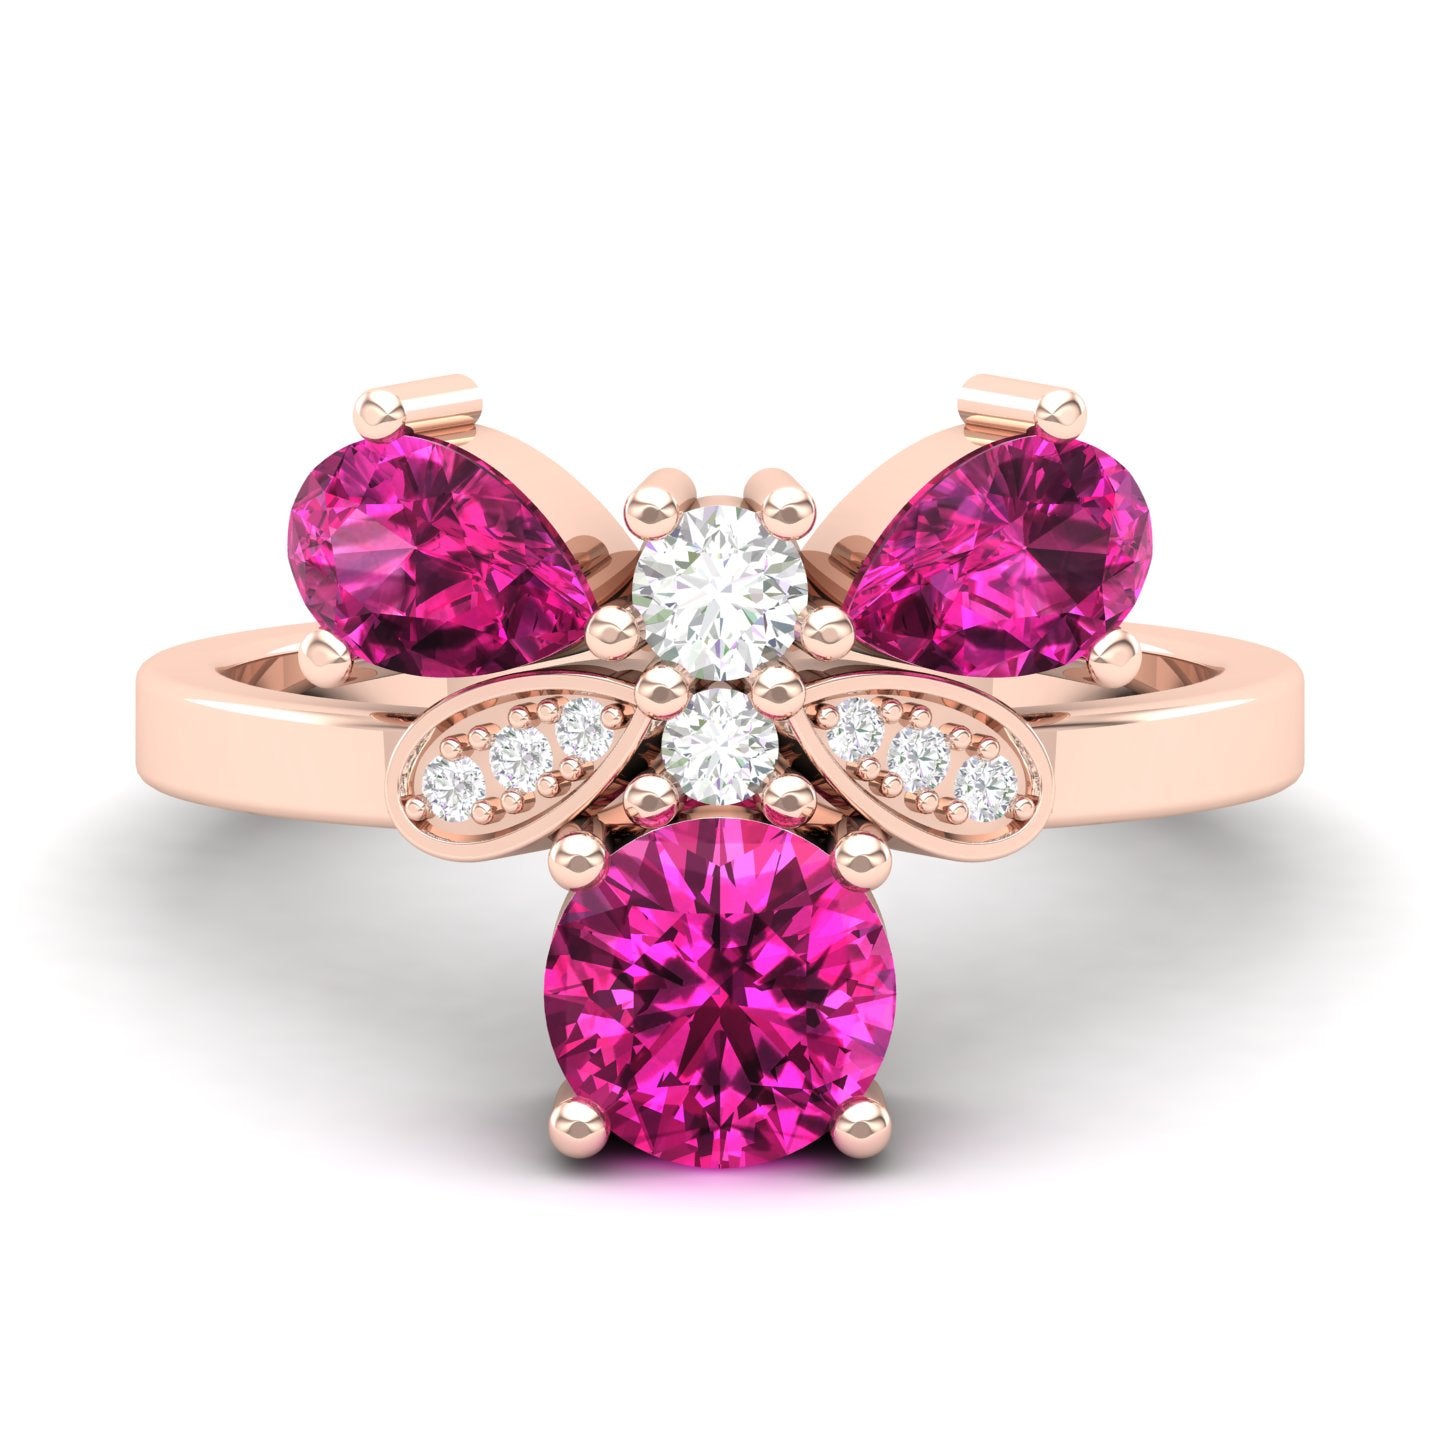 Maurya Colorfly Ruby Ring with Round Diamonds